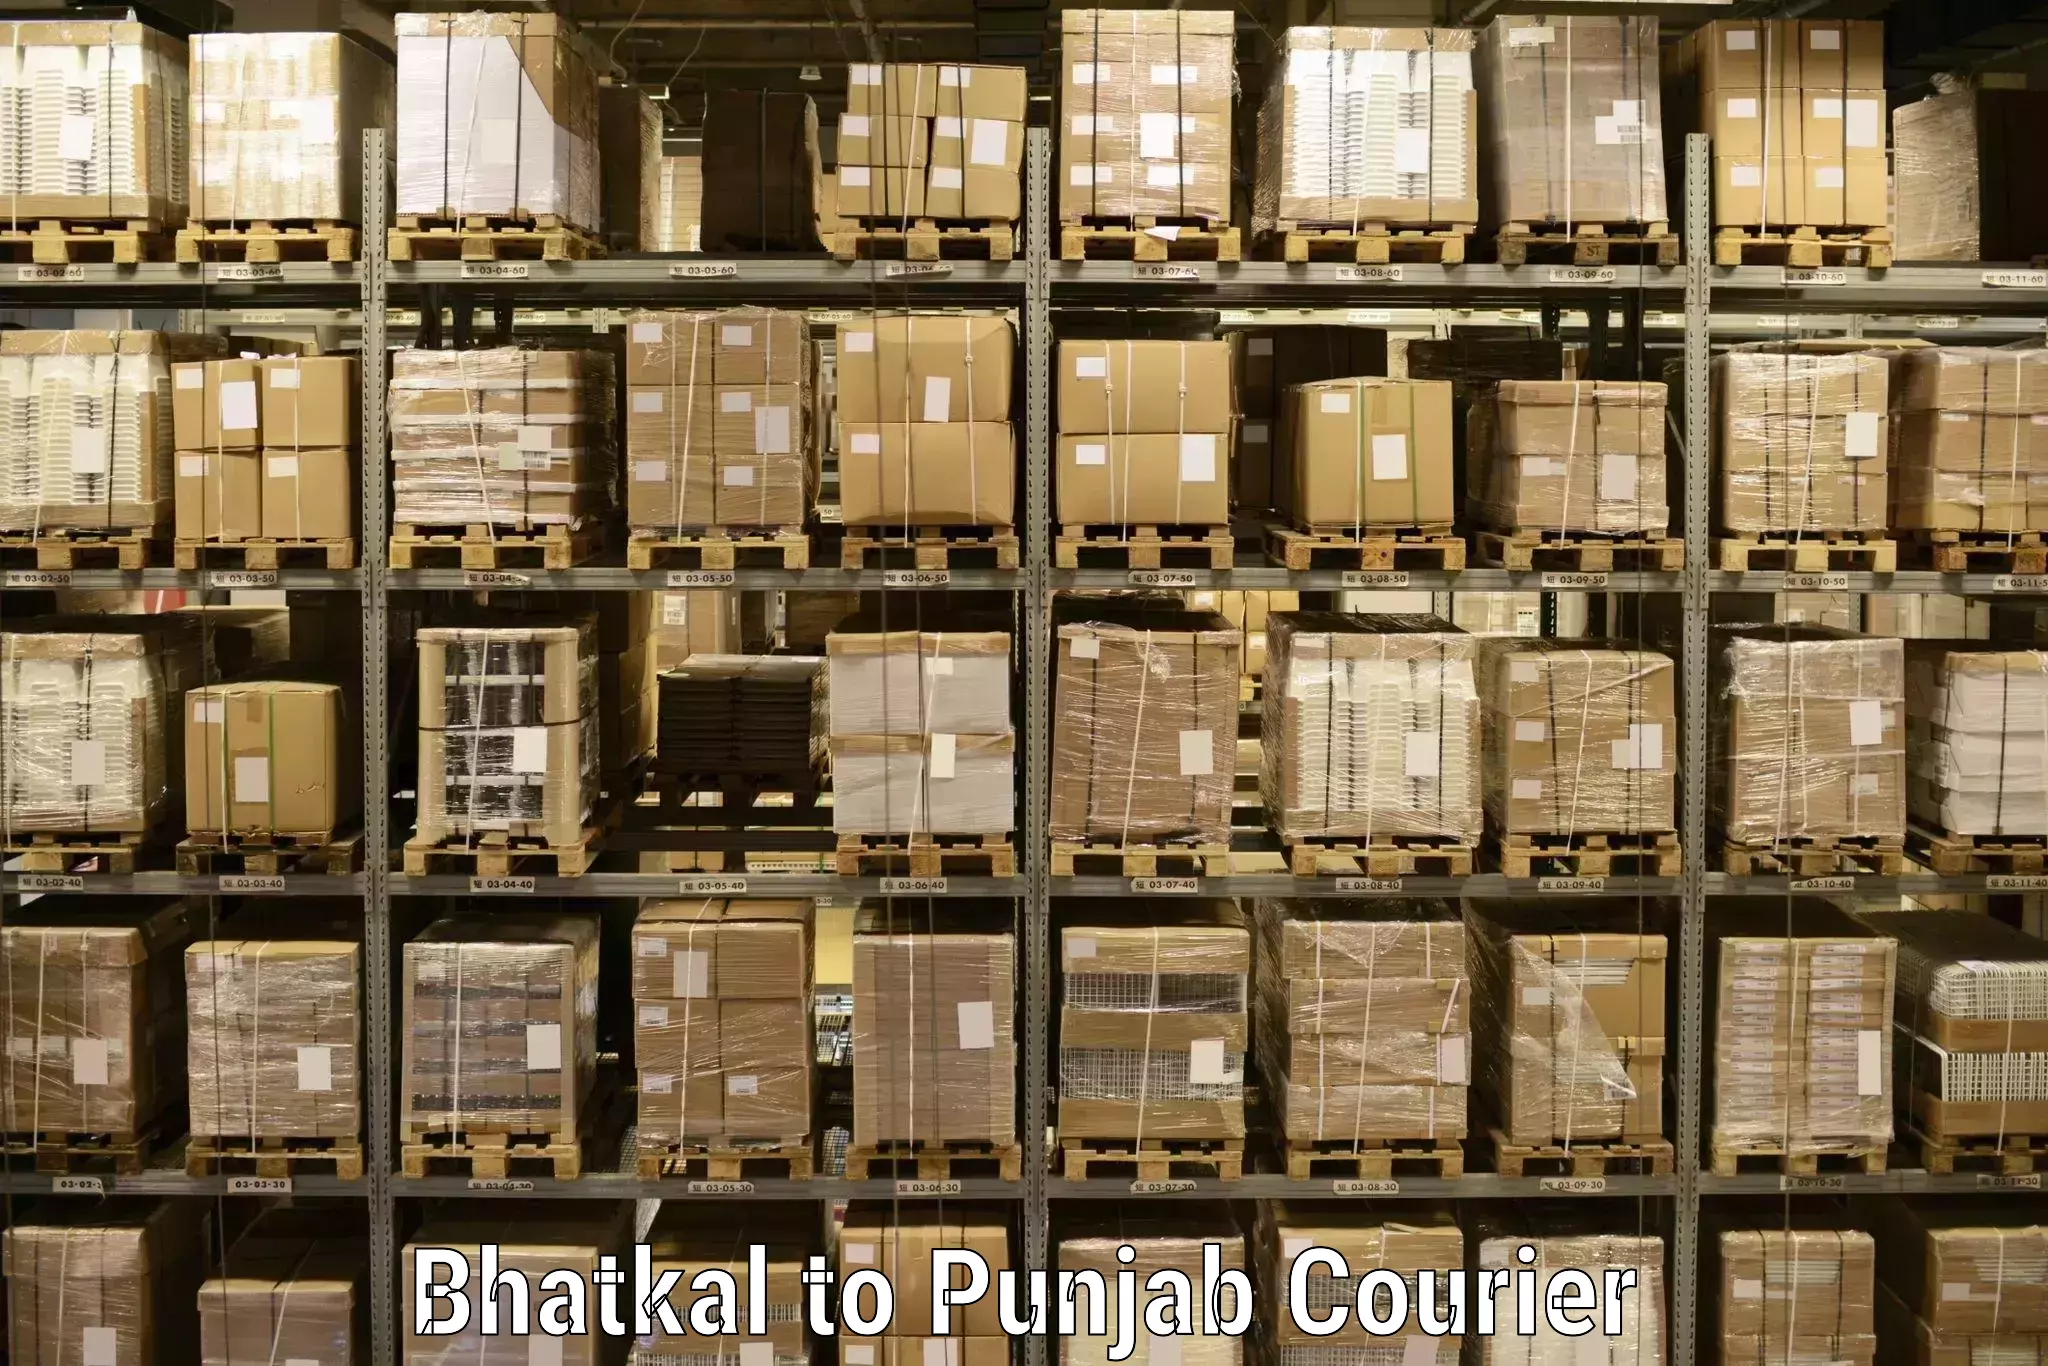 Courier service partnerships Bhatkal to Begowal